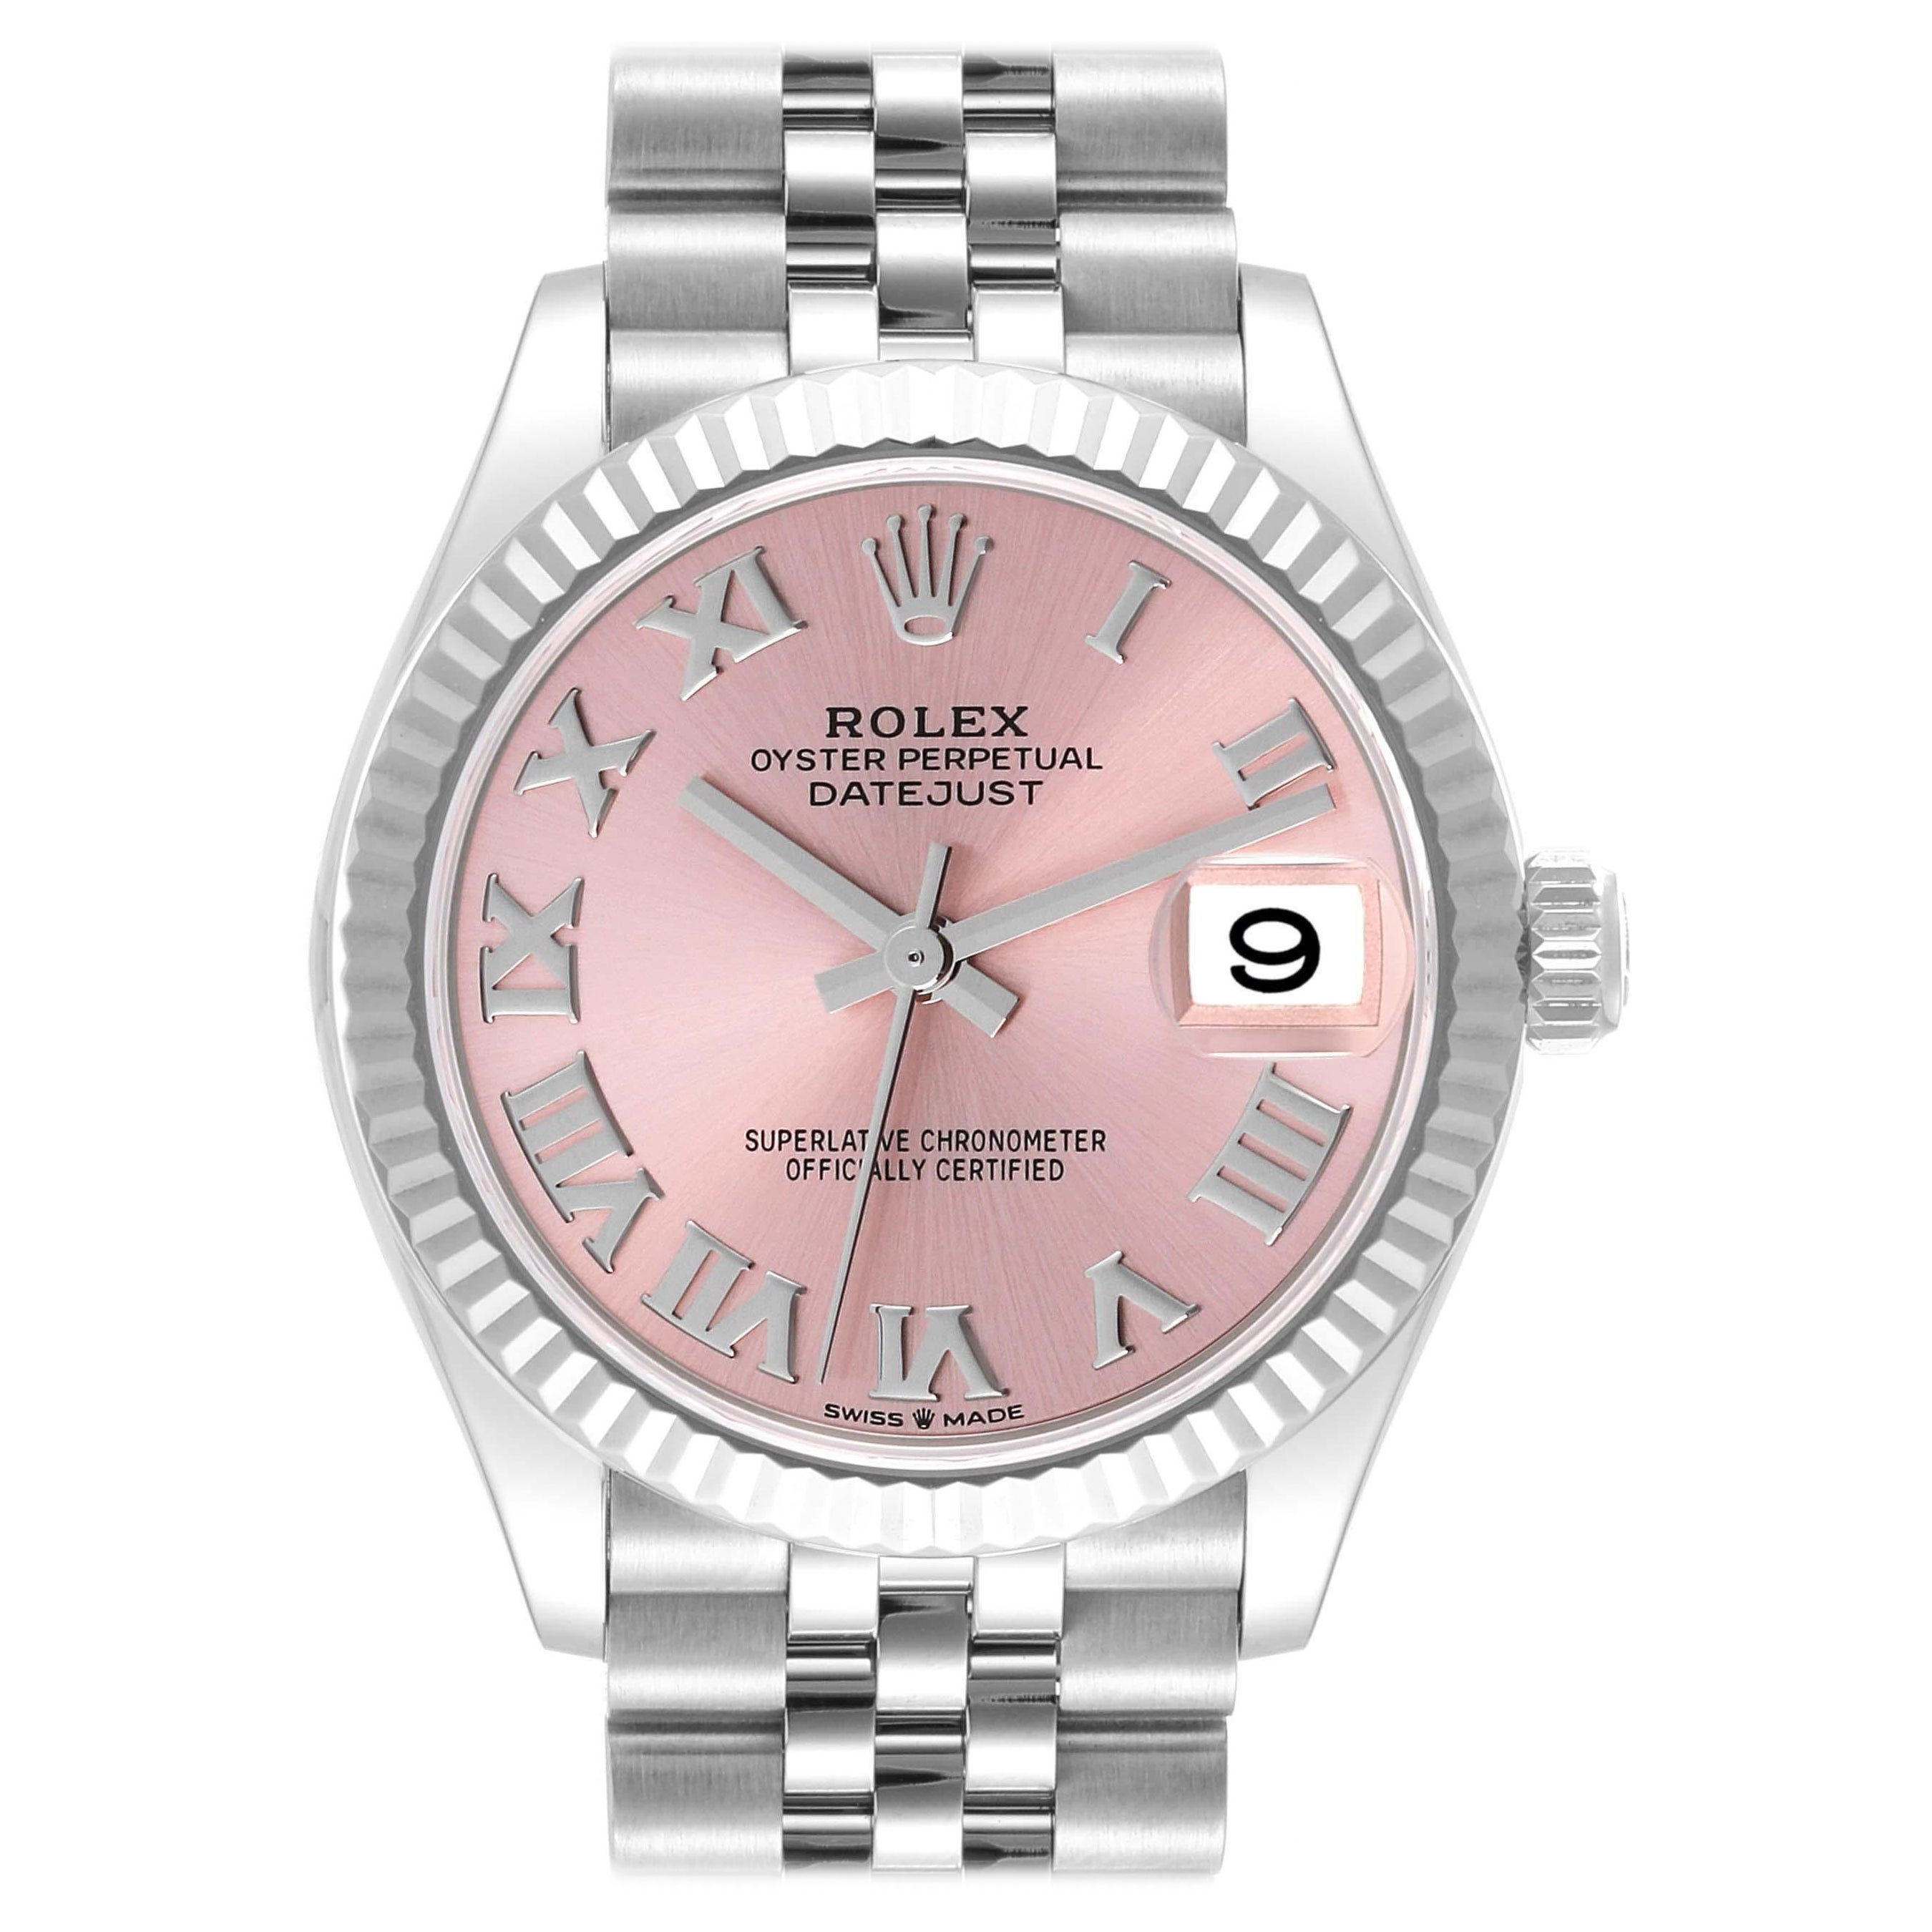 Rolex Datejust Midsize Steel White Gold Pink Dial Ladies Watch 278274 Box Card